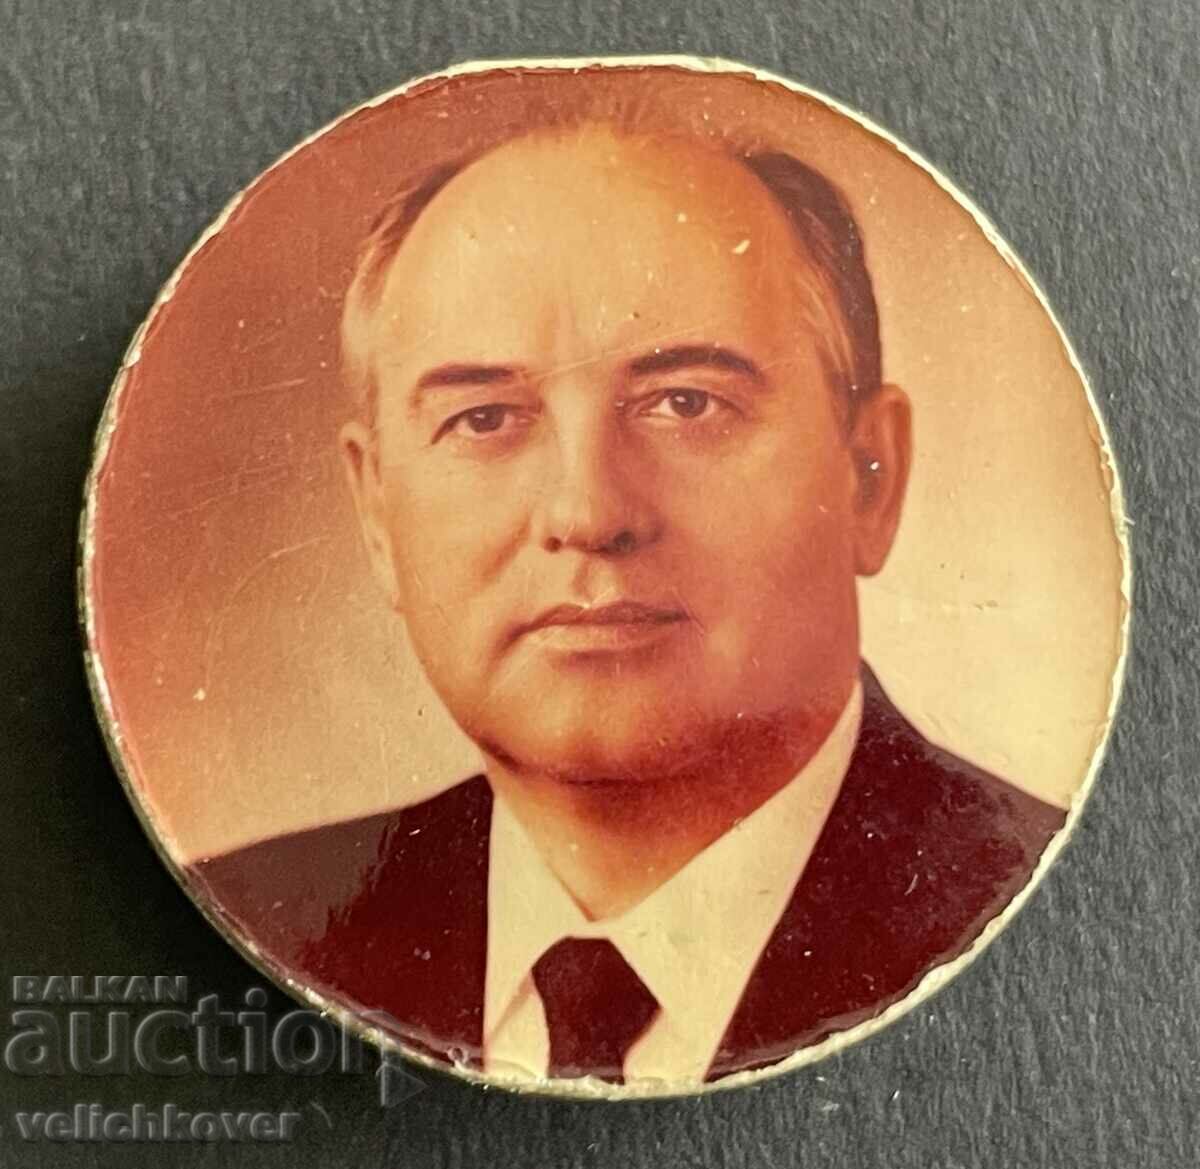 37468 USSR badge with the image of Mikhail Gorbachev 80s.